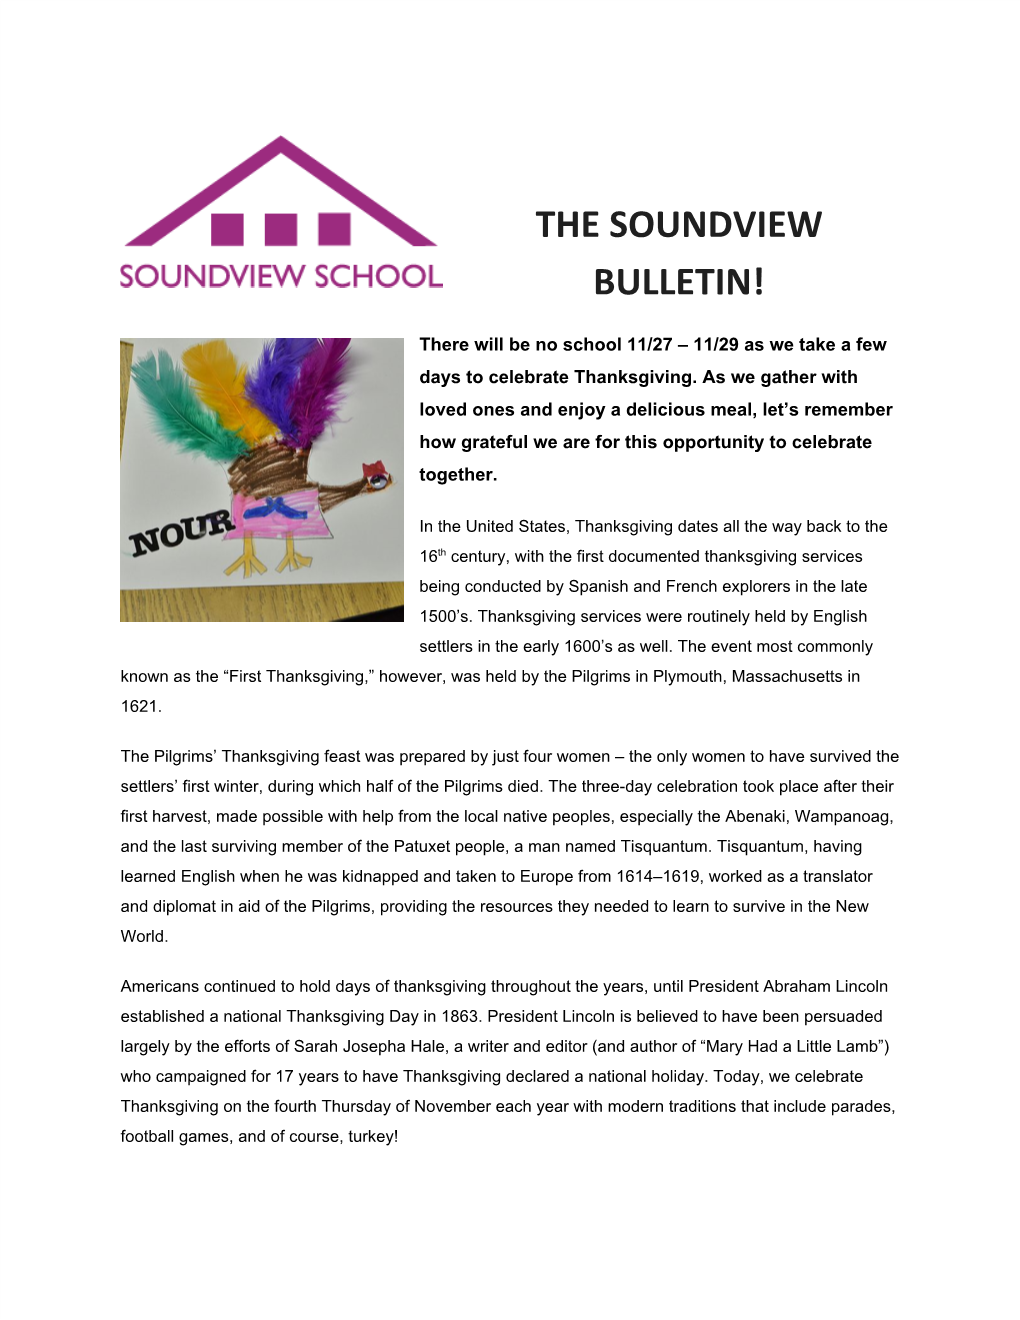 The Soundview Bulletin!